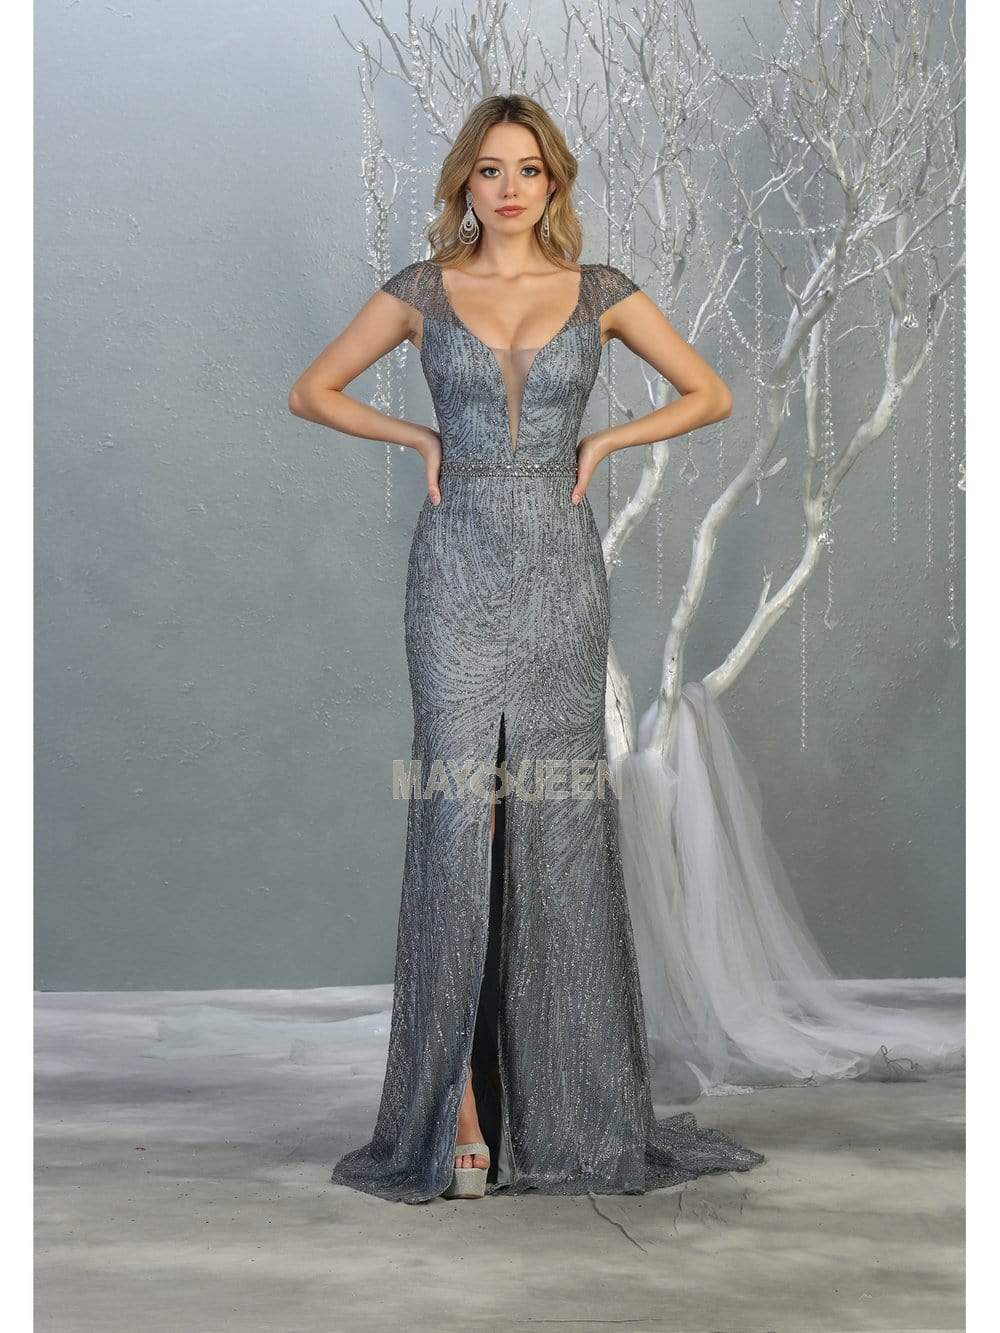 May Queen - RQ7812 Glitter Plunging V-Neck Dress with Slit Mother of the Bride Dresses 4 / Dusty-Blue